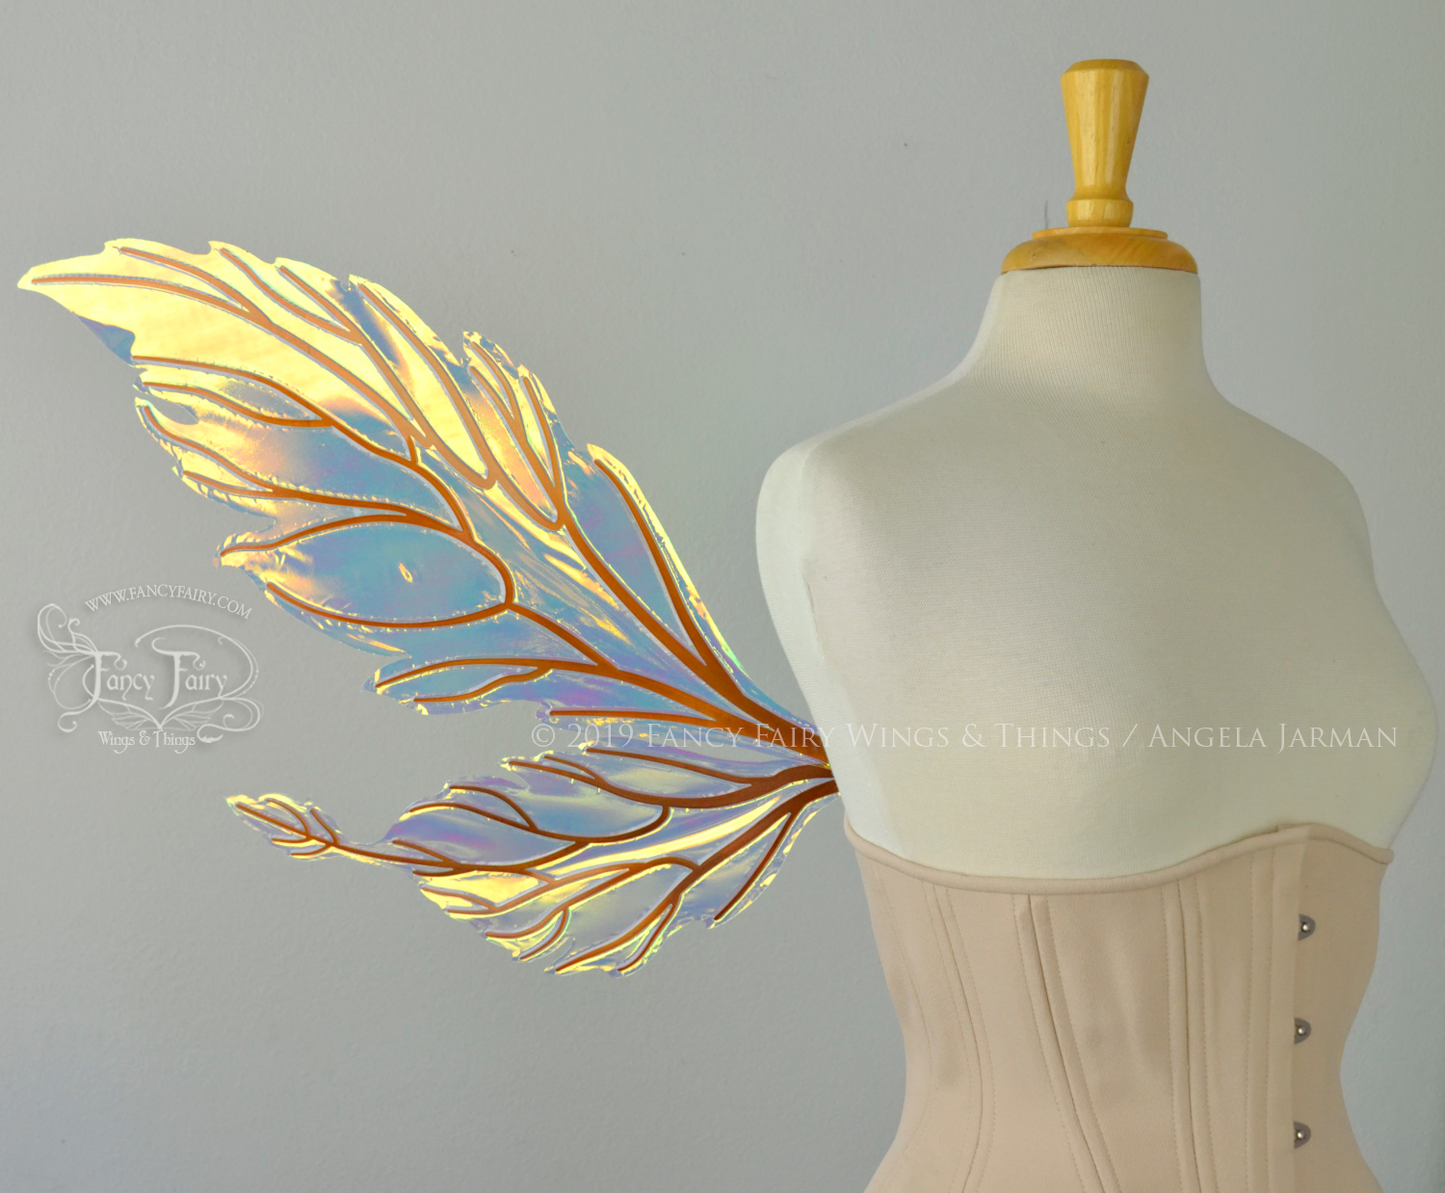 Ivy Iridescent Convertible Fairy Wings in Clear Diamond Fire with Copper veins